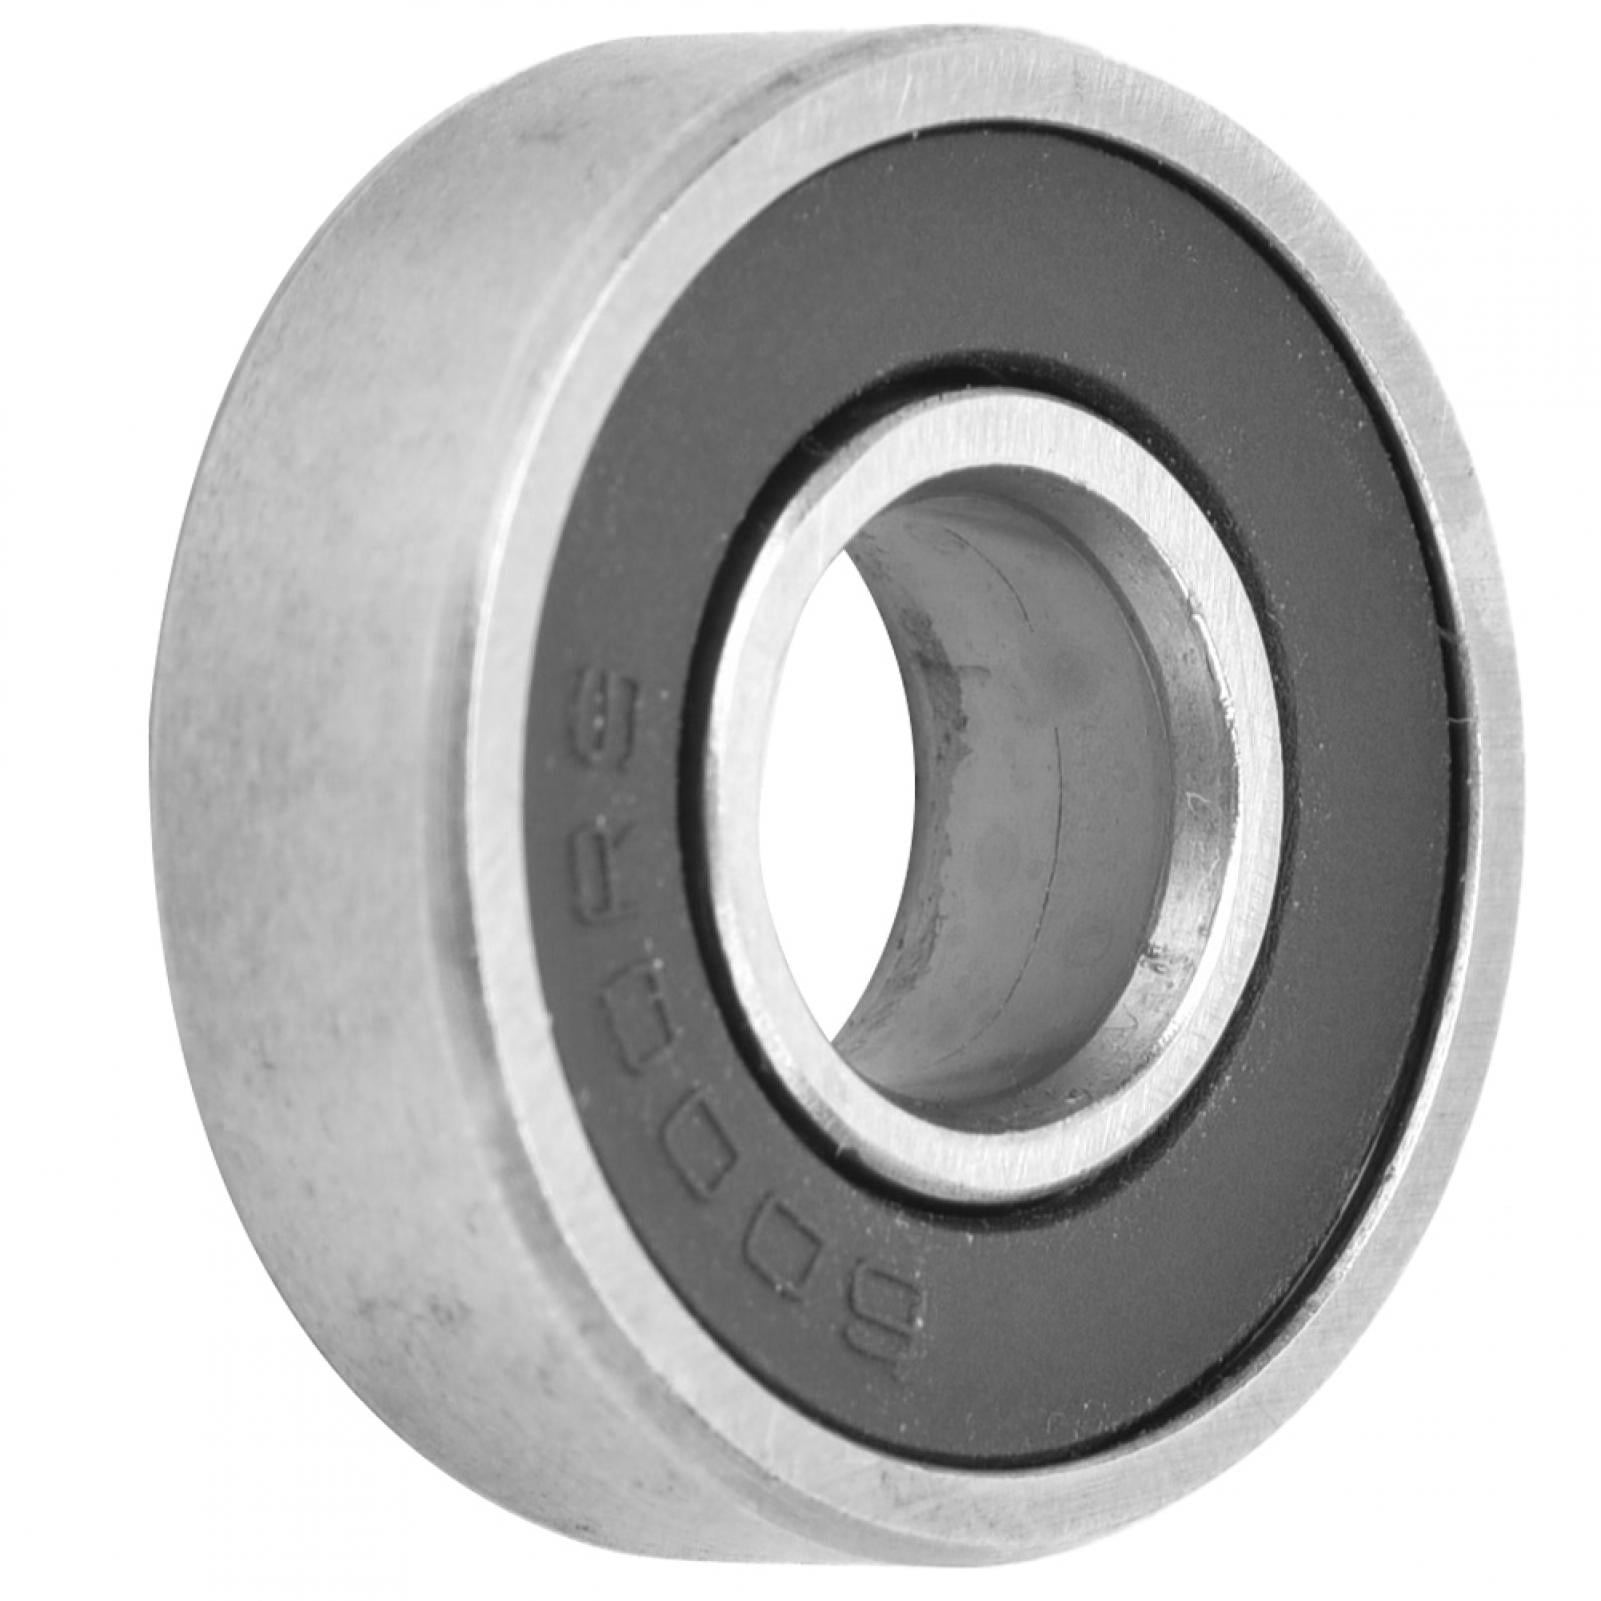 Hardware Accessorie for Agricultural Machinery Automotive Punching Industrial Parts 10Pcs Bearing 6000RS Bearing 